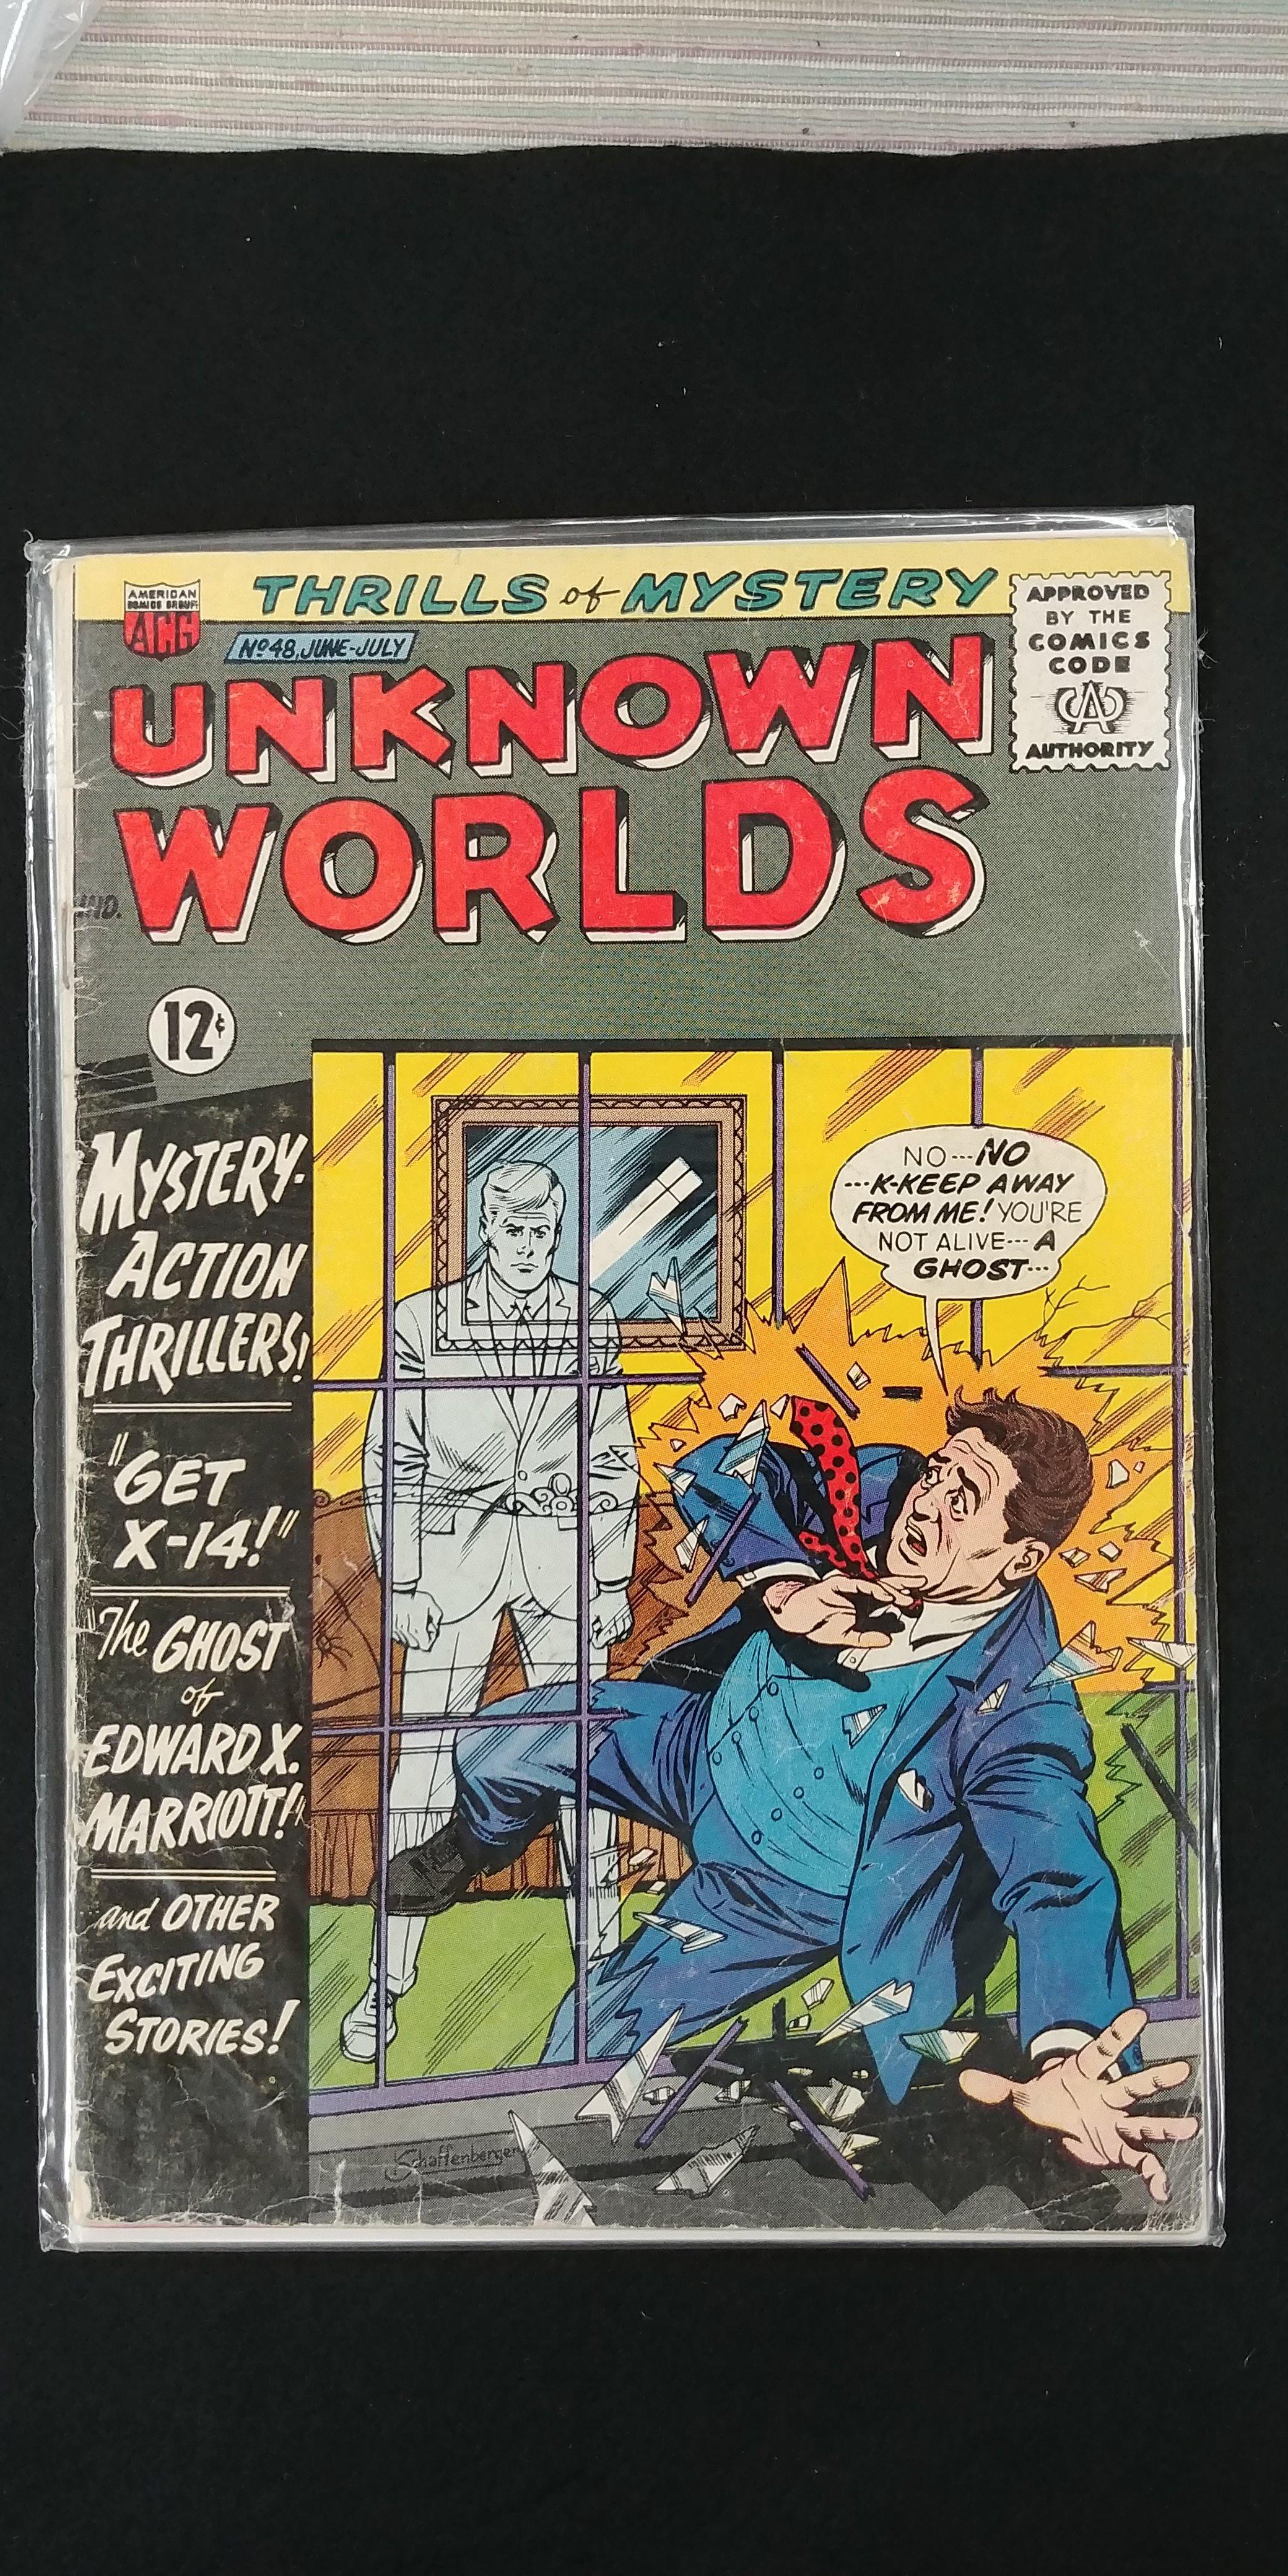 Unknown Worlds #48 | VOL I | American Comics Group | JUNE-JULY '66 | $55 Book Value